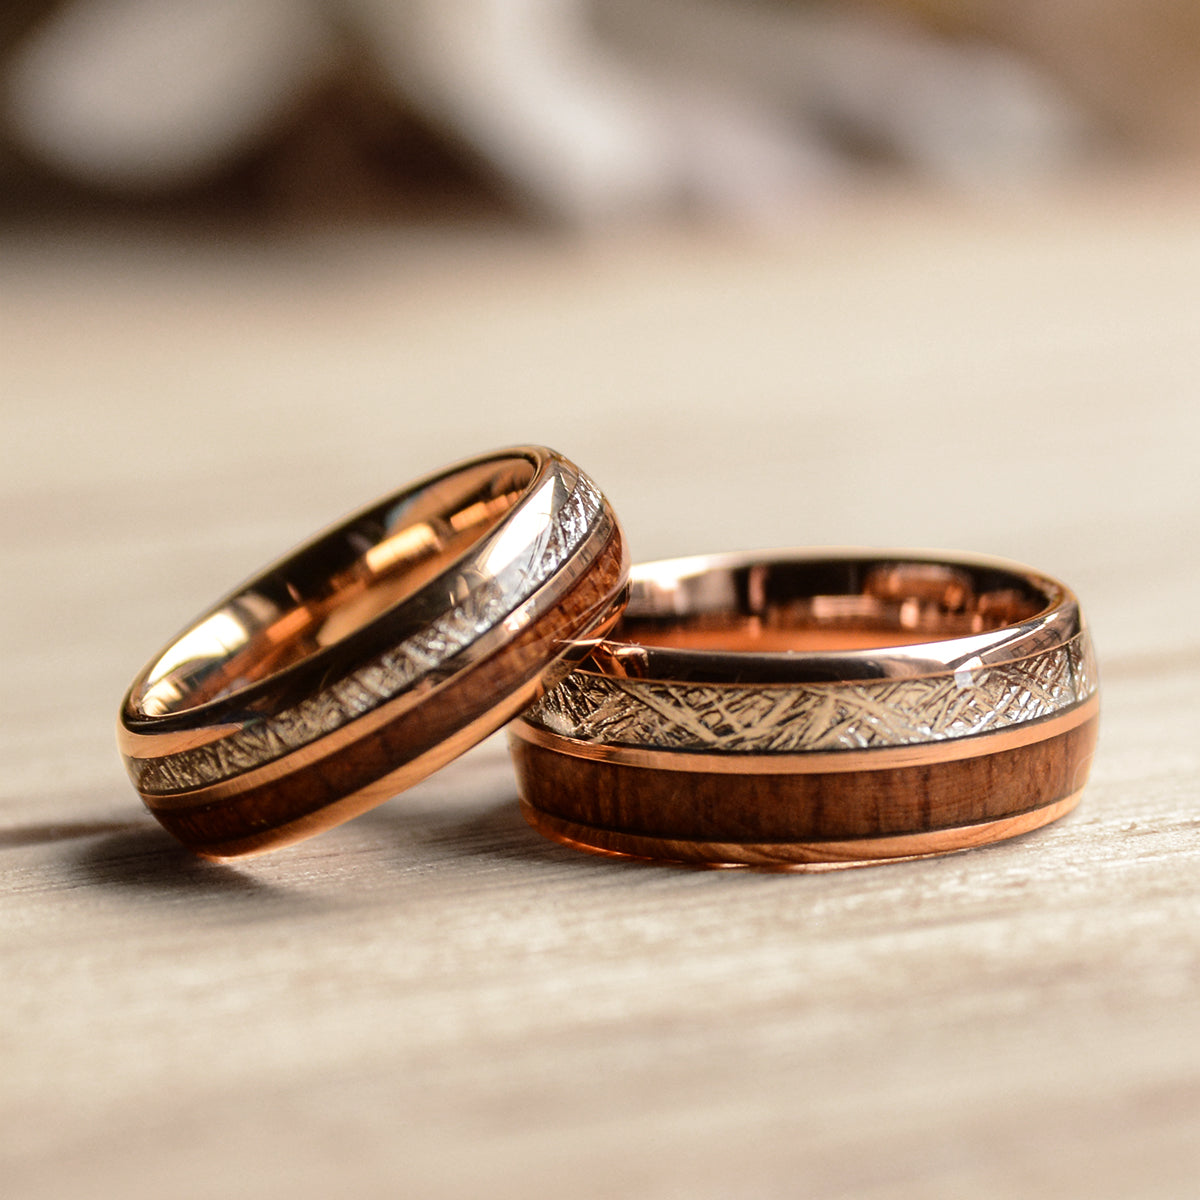 Buy Rose Gold-Toned Rings for Men by PALMONAS Online | Ajio.com